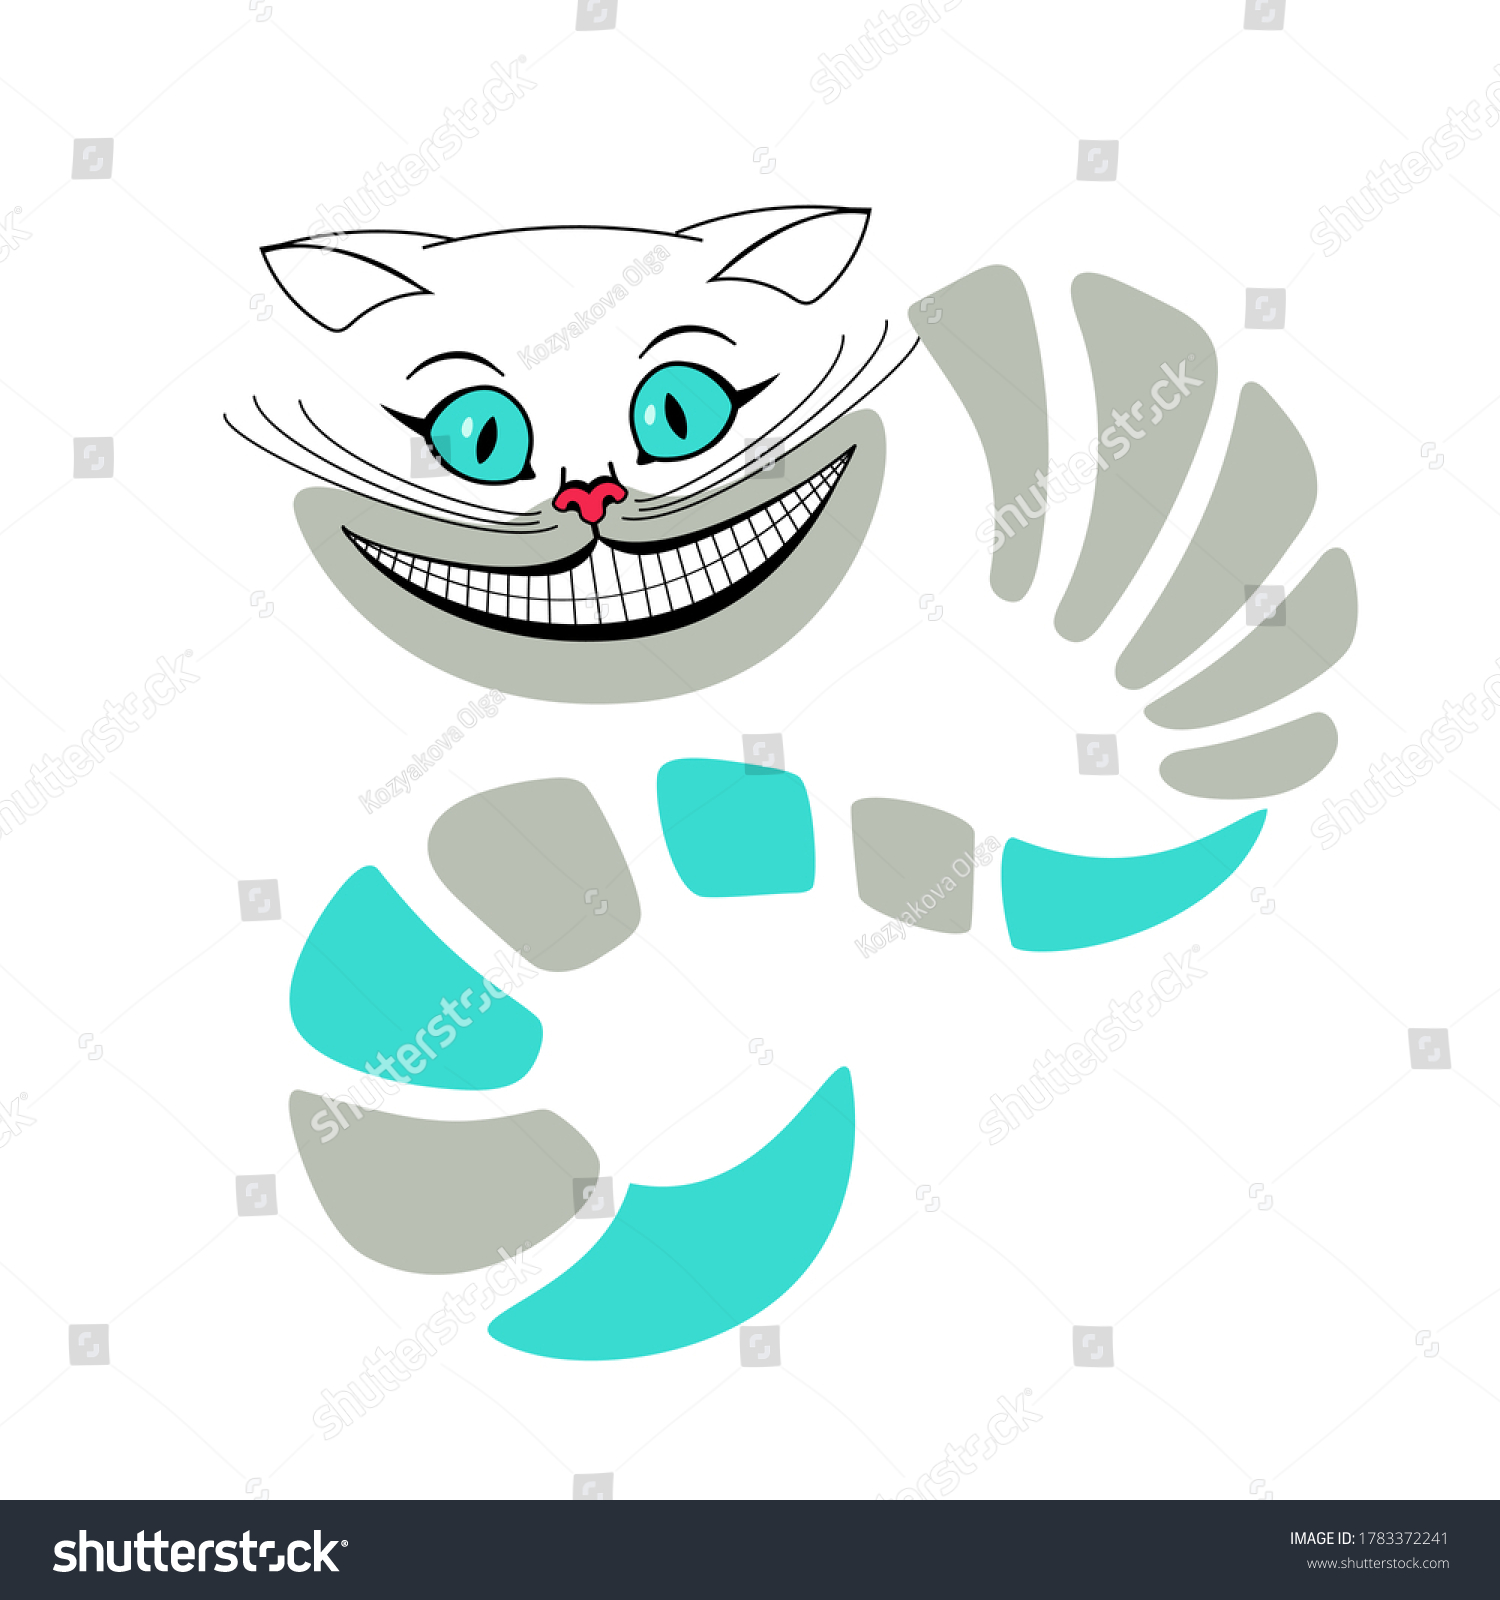 SVG of Vector illustration of a Cheshire cat with a body and a tail. Alice in Wonderland. Cat face. The head of a cat with a large mustache. The Cheshire cat smiled. Flat. svg